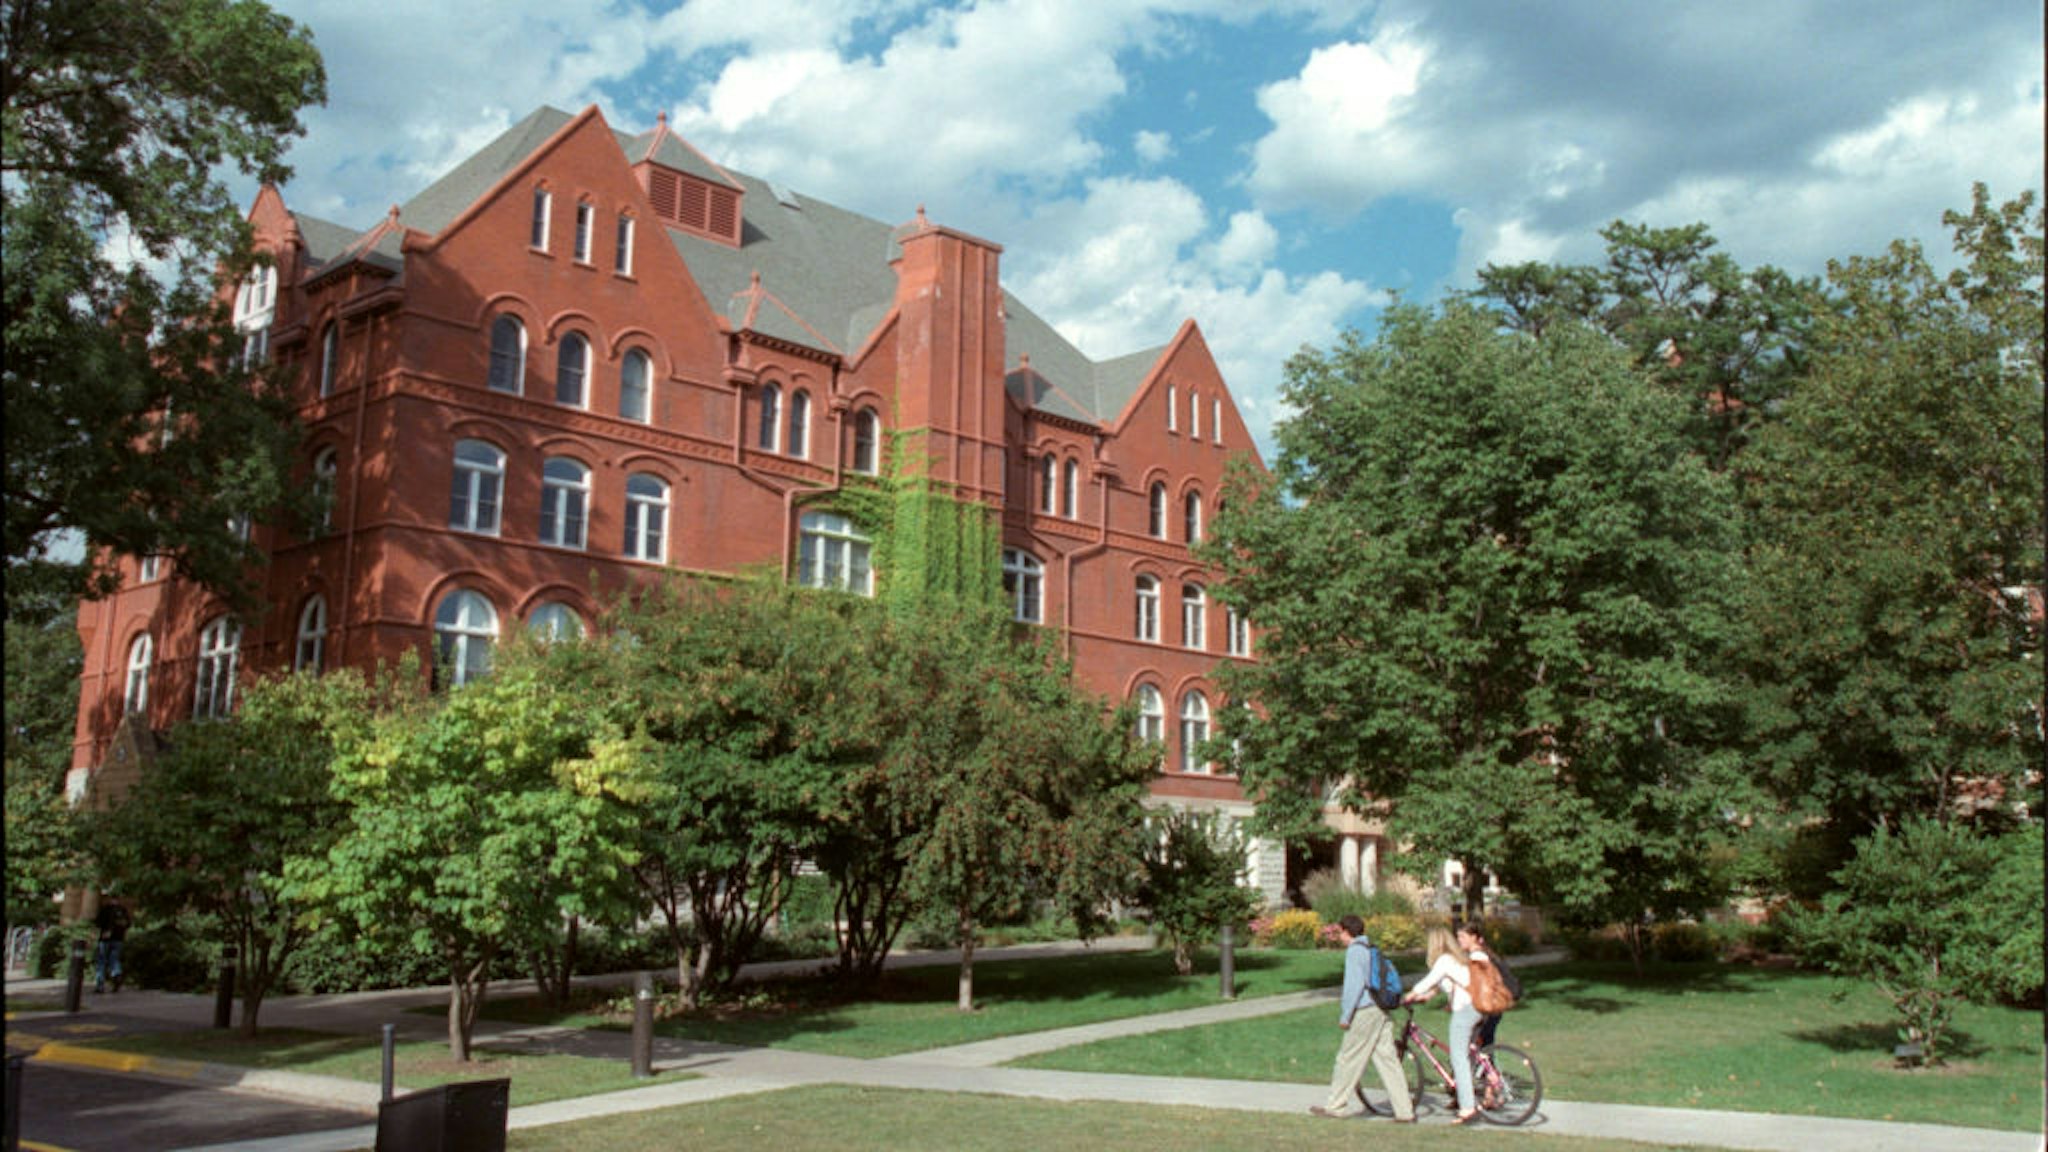 General view of Macalester College campus in St. Paul.